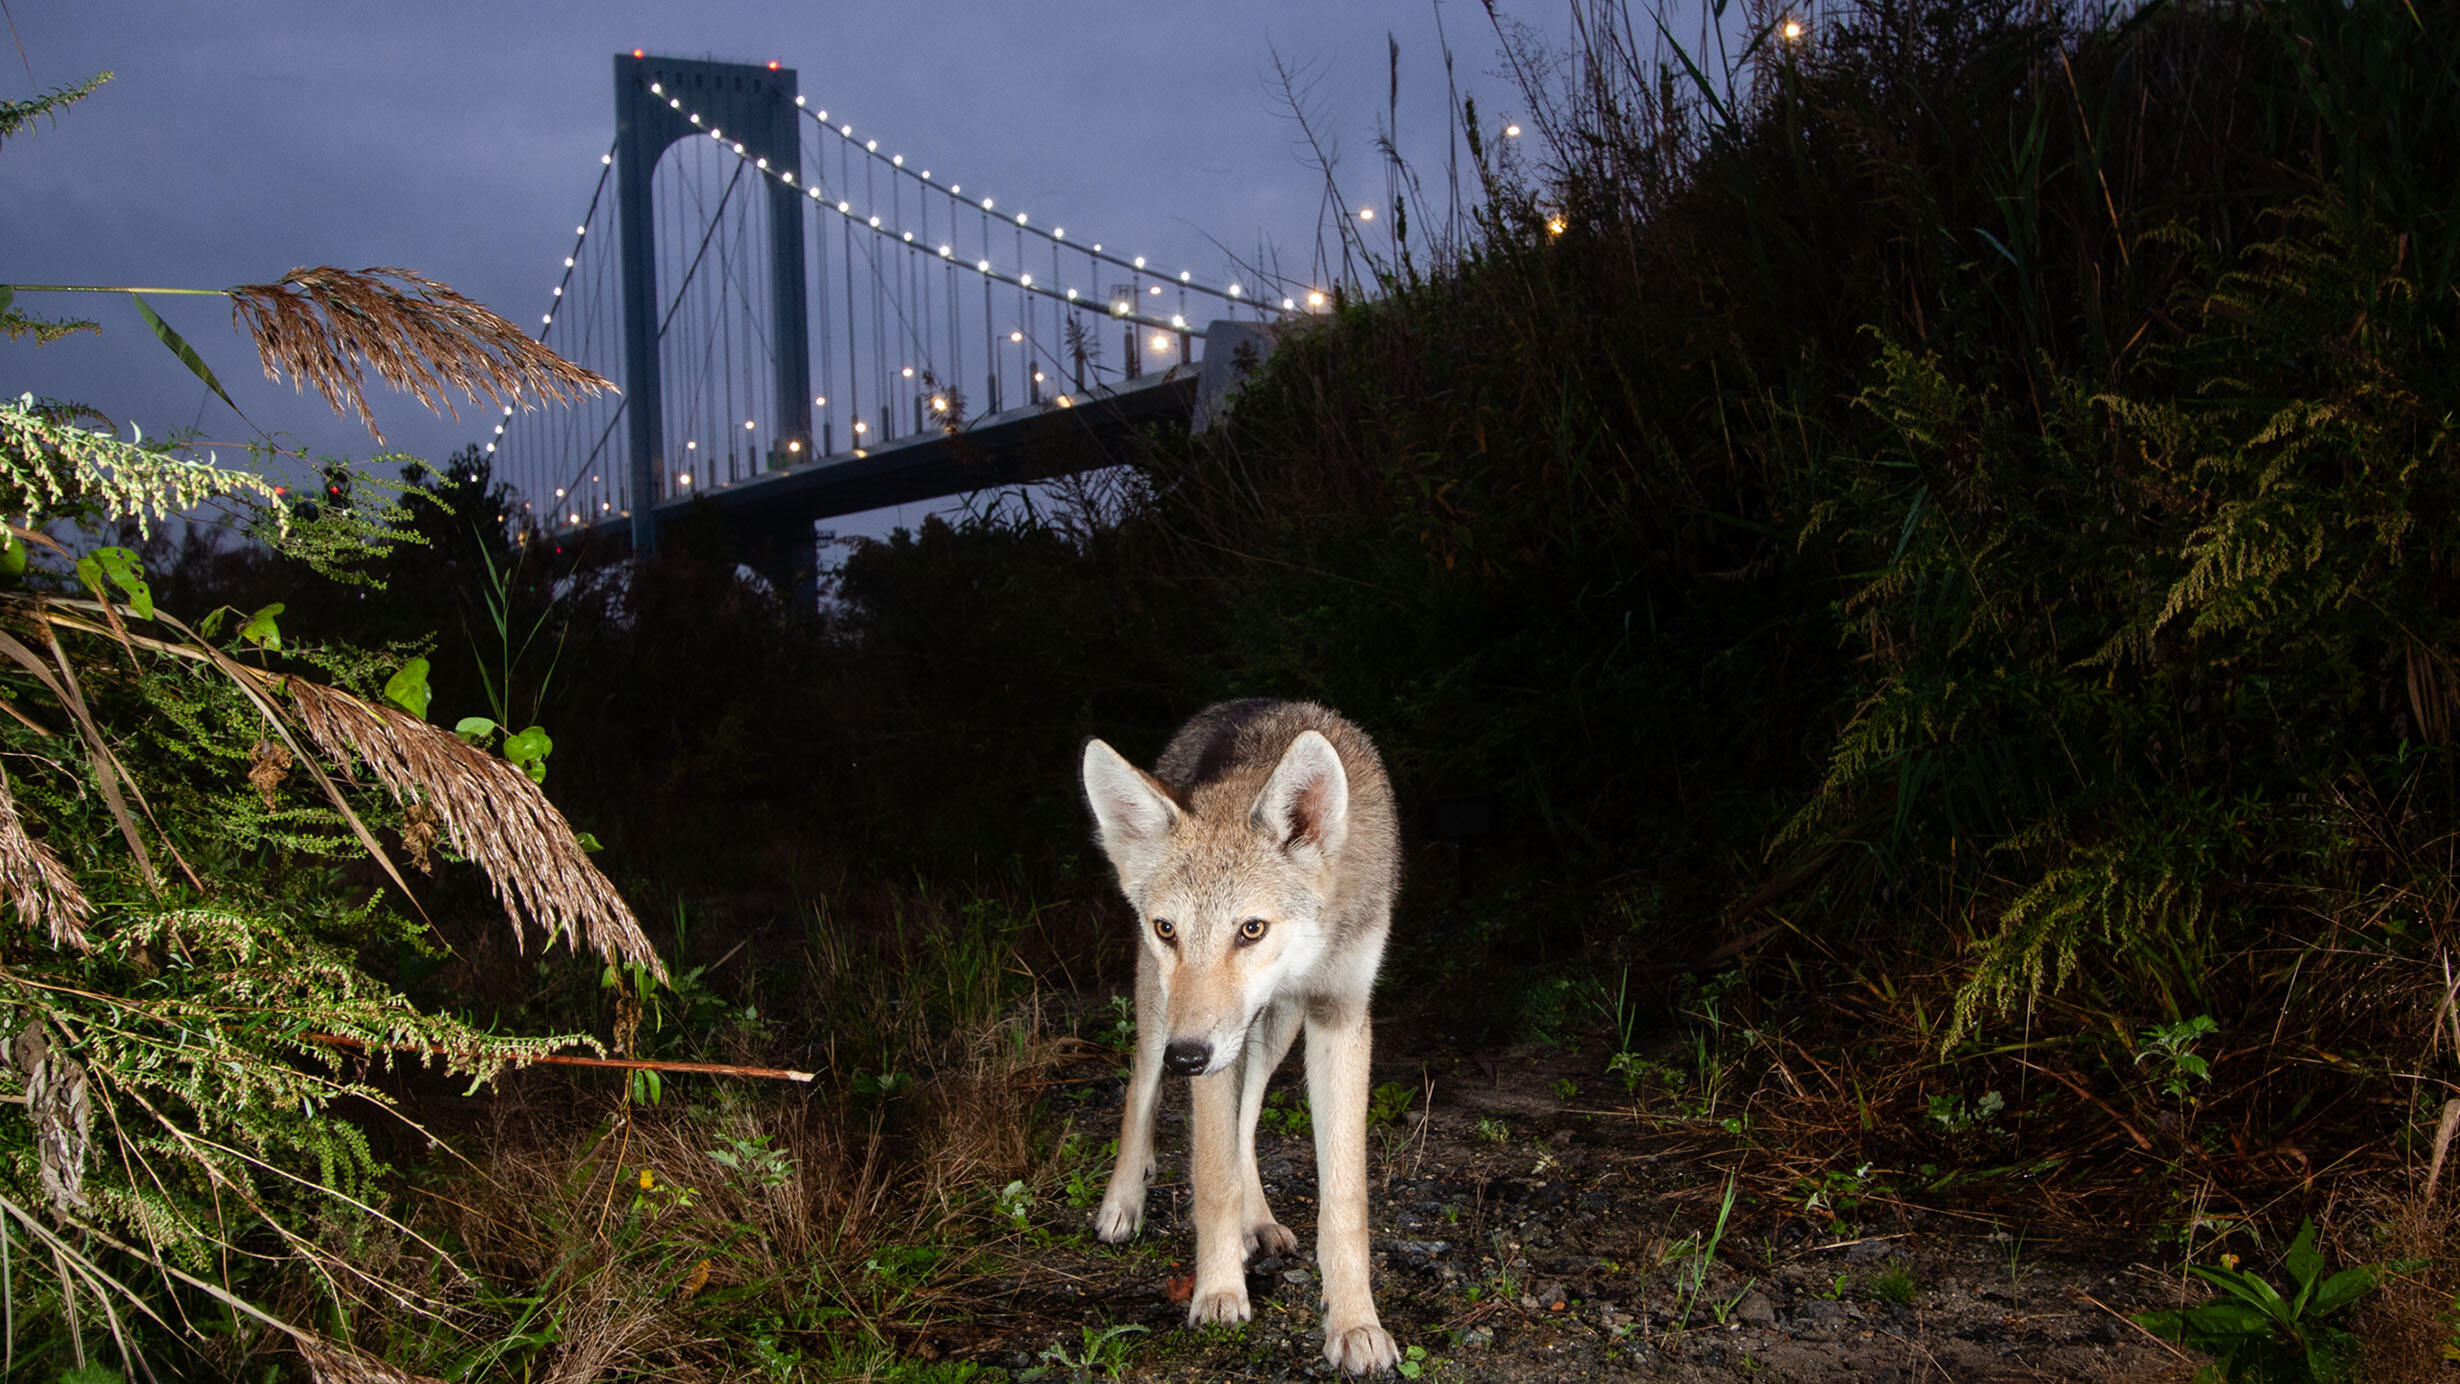 An Eastern coyote walks along a dirt trail; a New York City bridge is in view in the background.